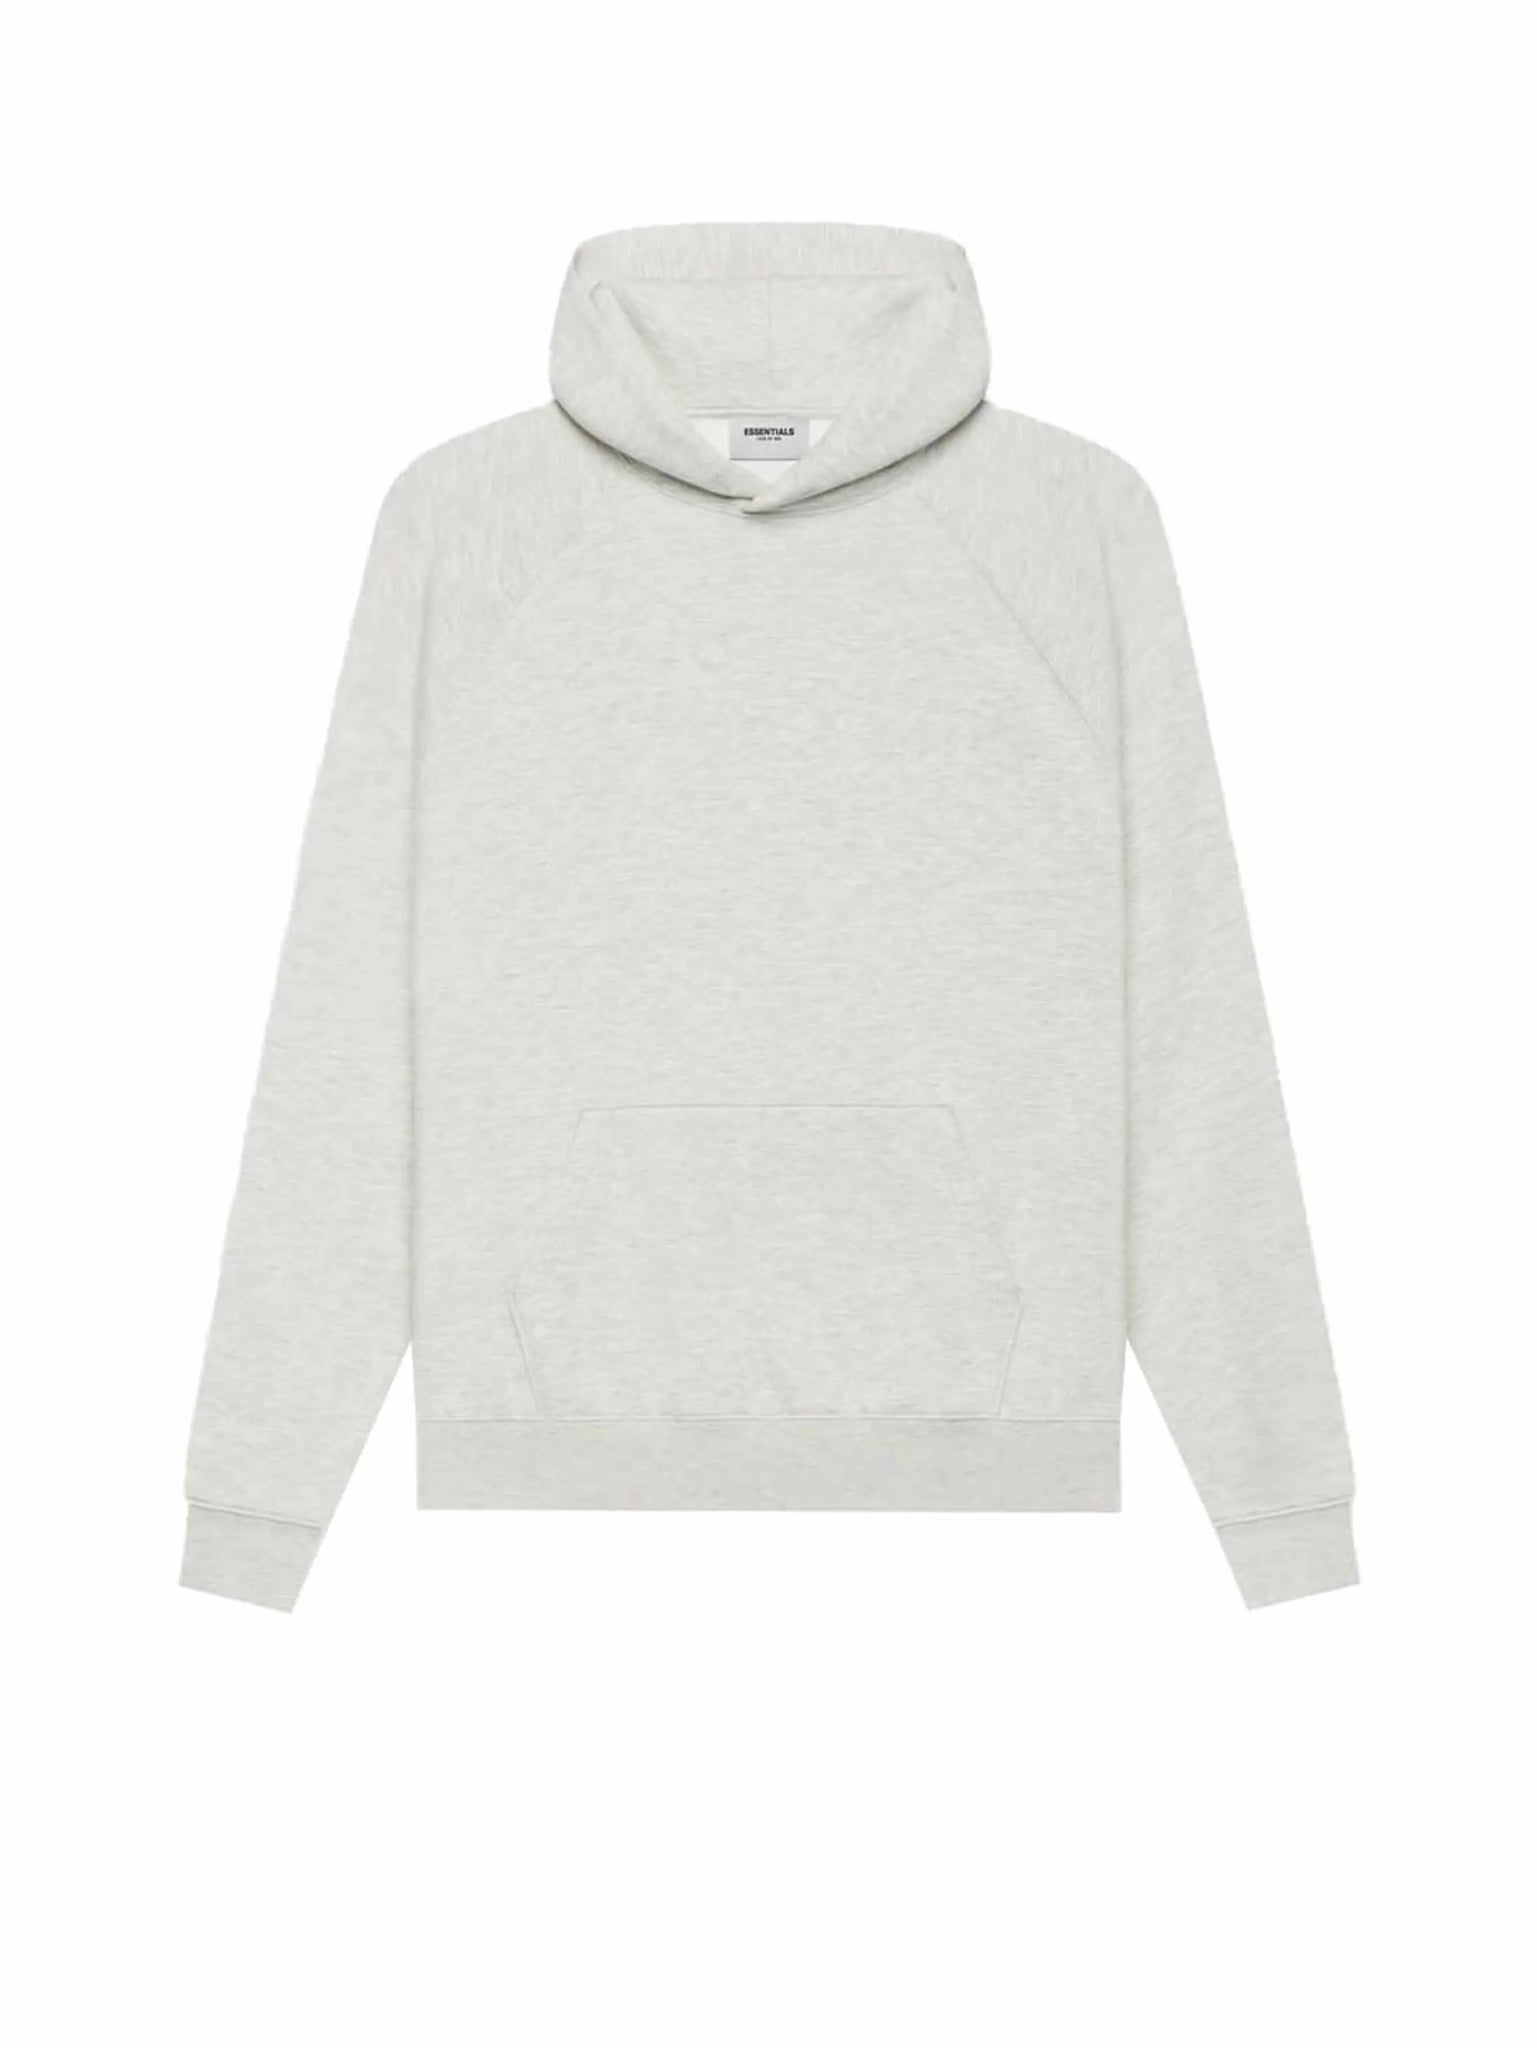 Fear of God Essentials (SS21) Pullover Hoodie Light Heather Oatmeal in Auckland, New Zealand - Shop name